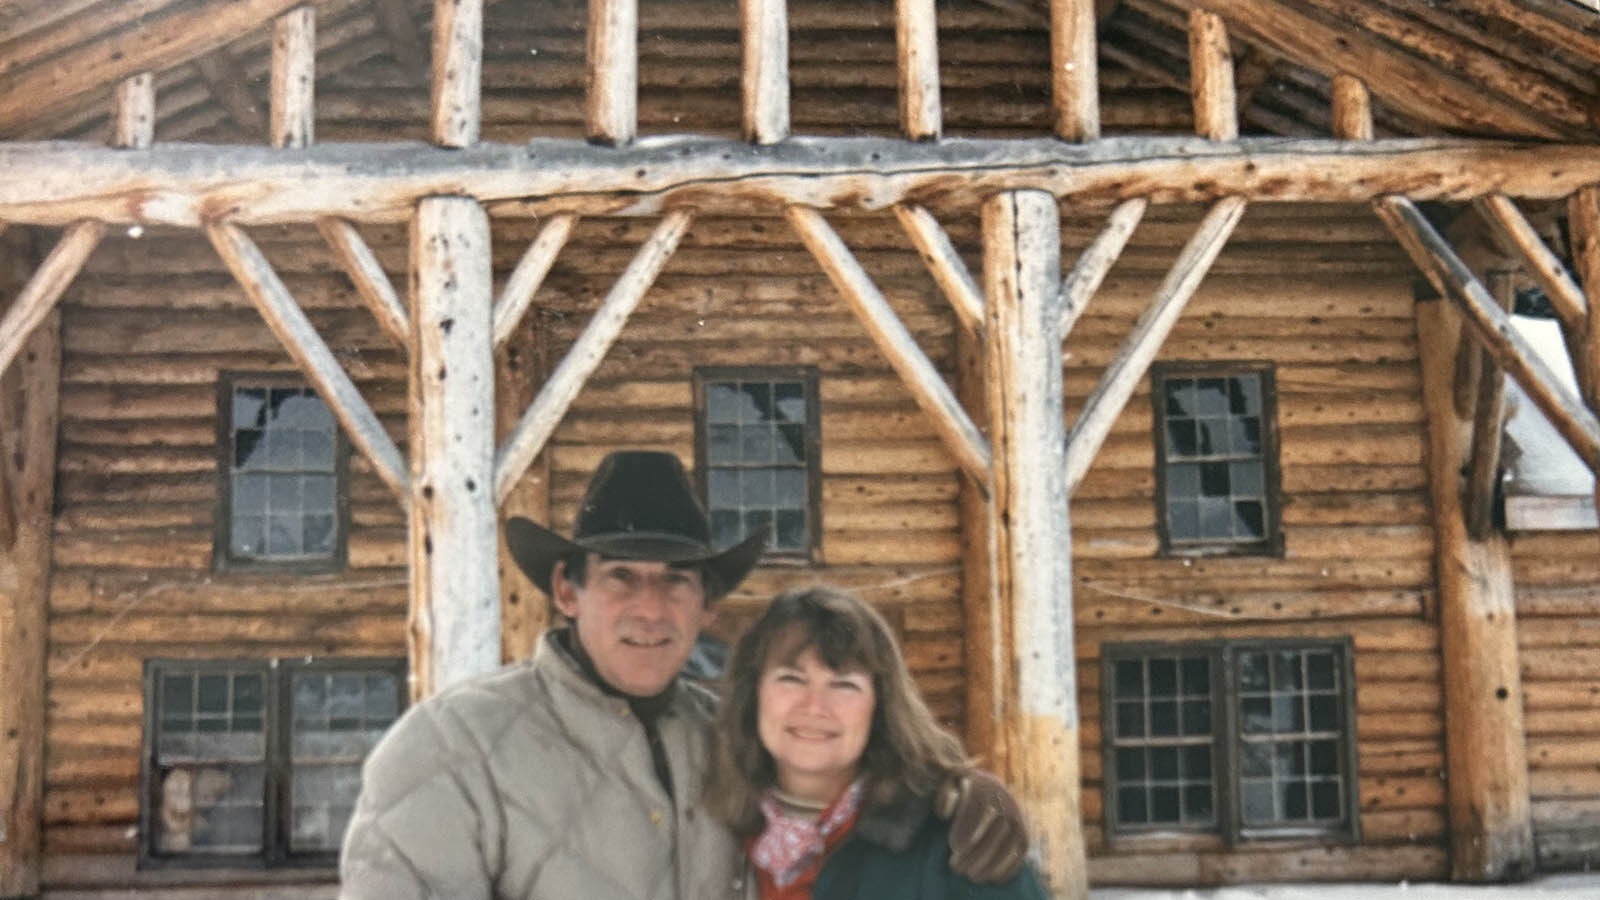 Dick and Barbara Calrsberg in front of Brooks Lake Lodge in 1988. The bought the property the year before and spent years restoring and expanding the historic Wyoming destination.